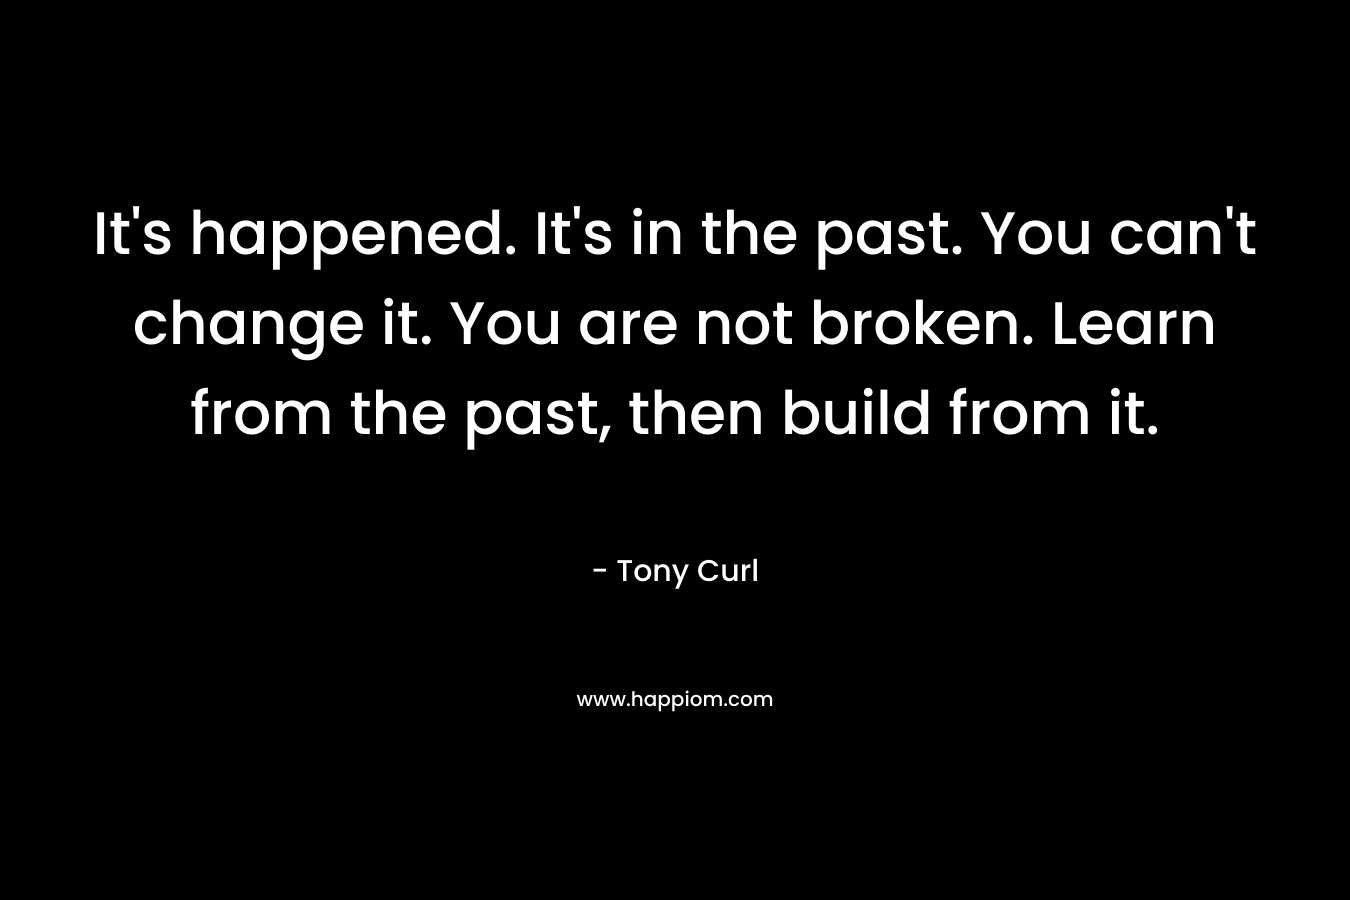 It's happened. It's in the past. You can't change it. You are not broken. Learn from the past, then build from it.